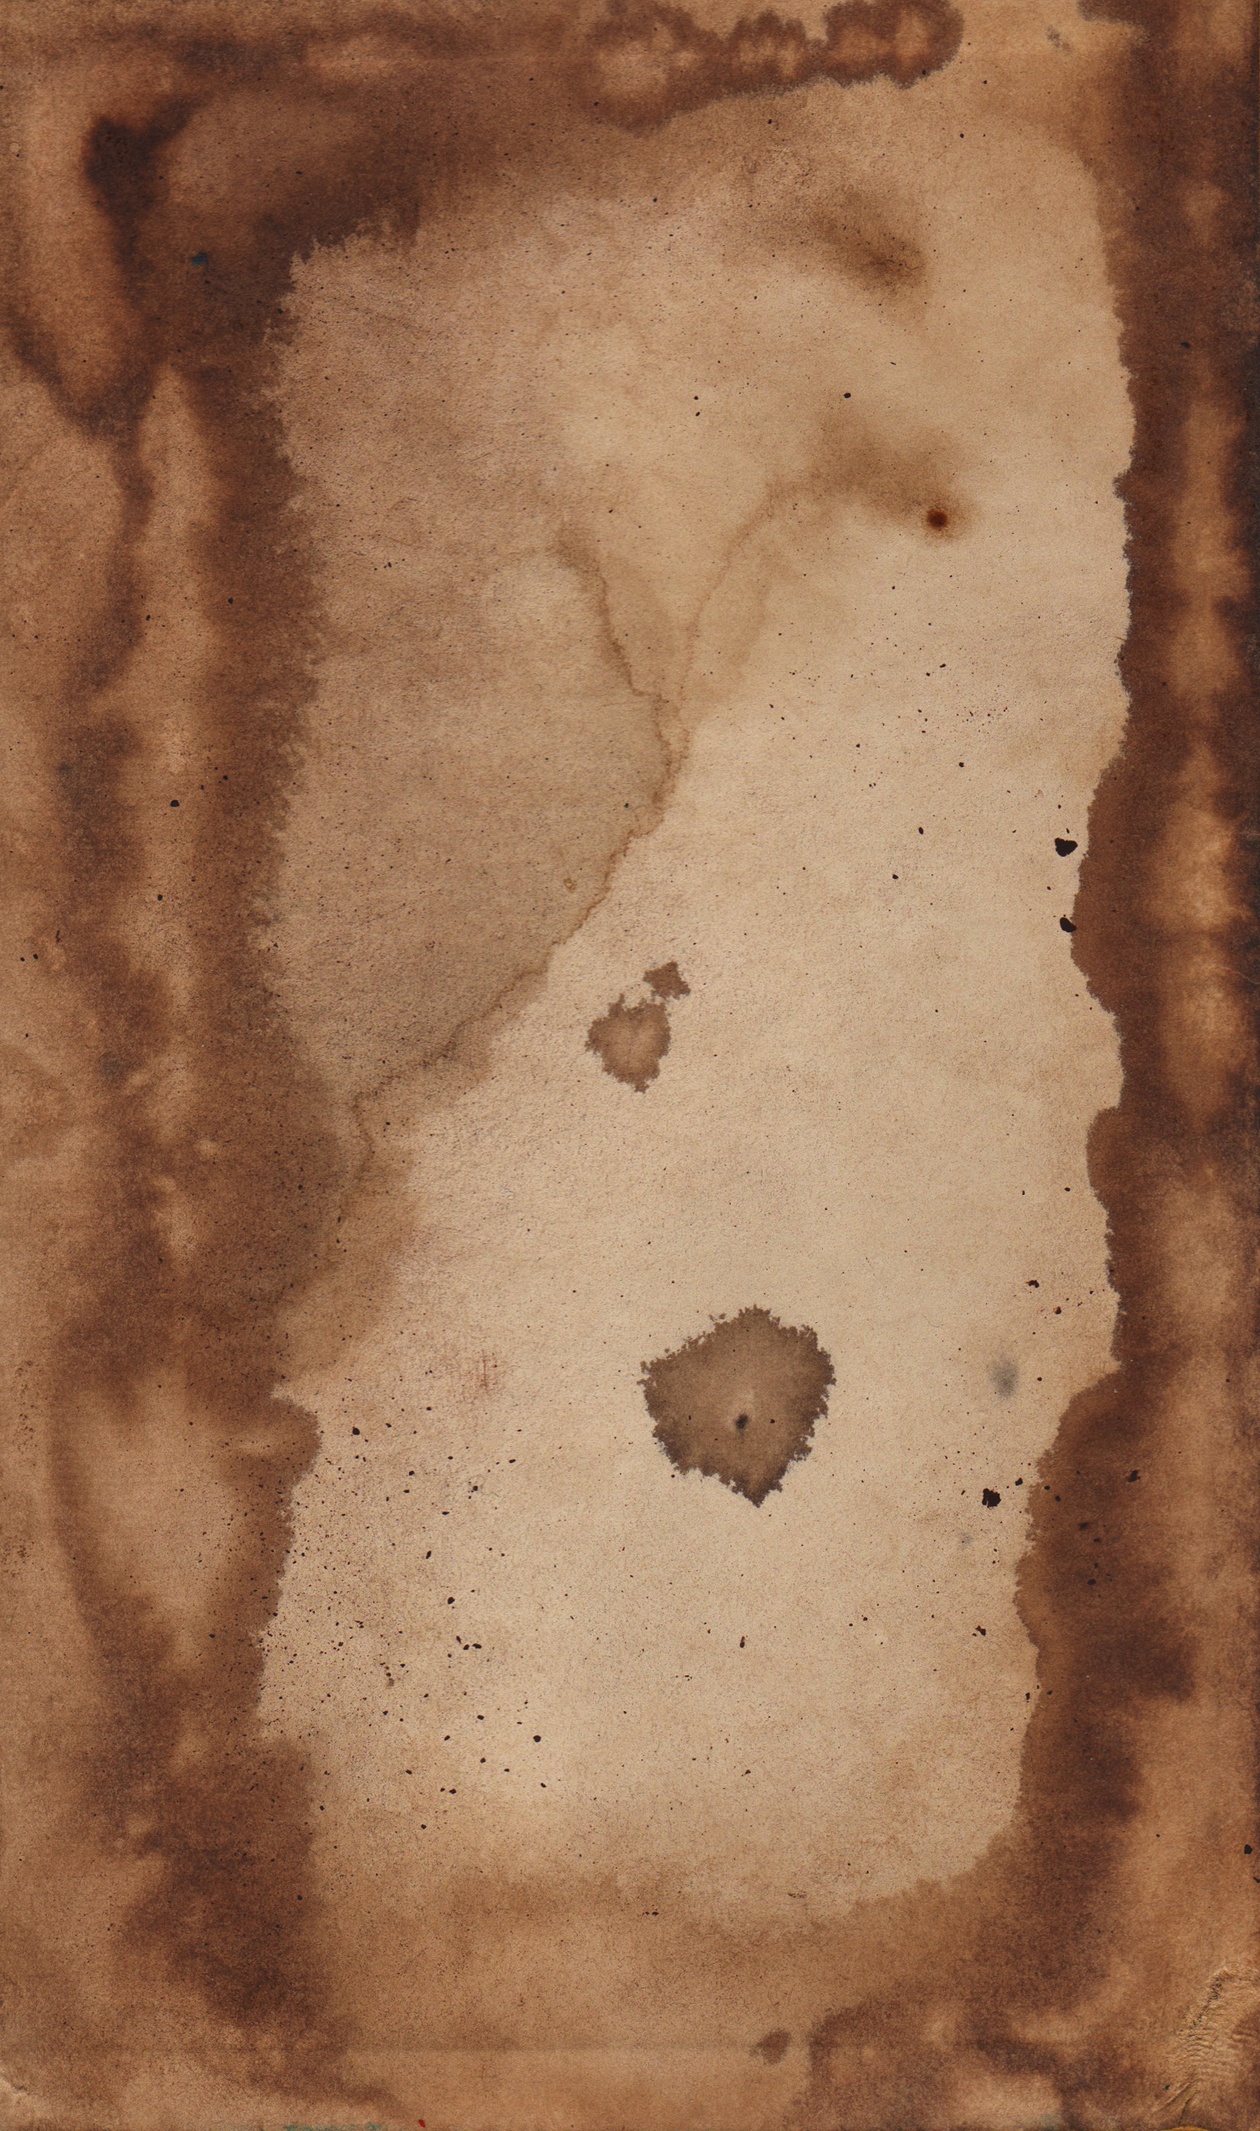 Coffee stained paper Photoshop brush